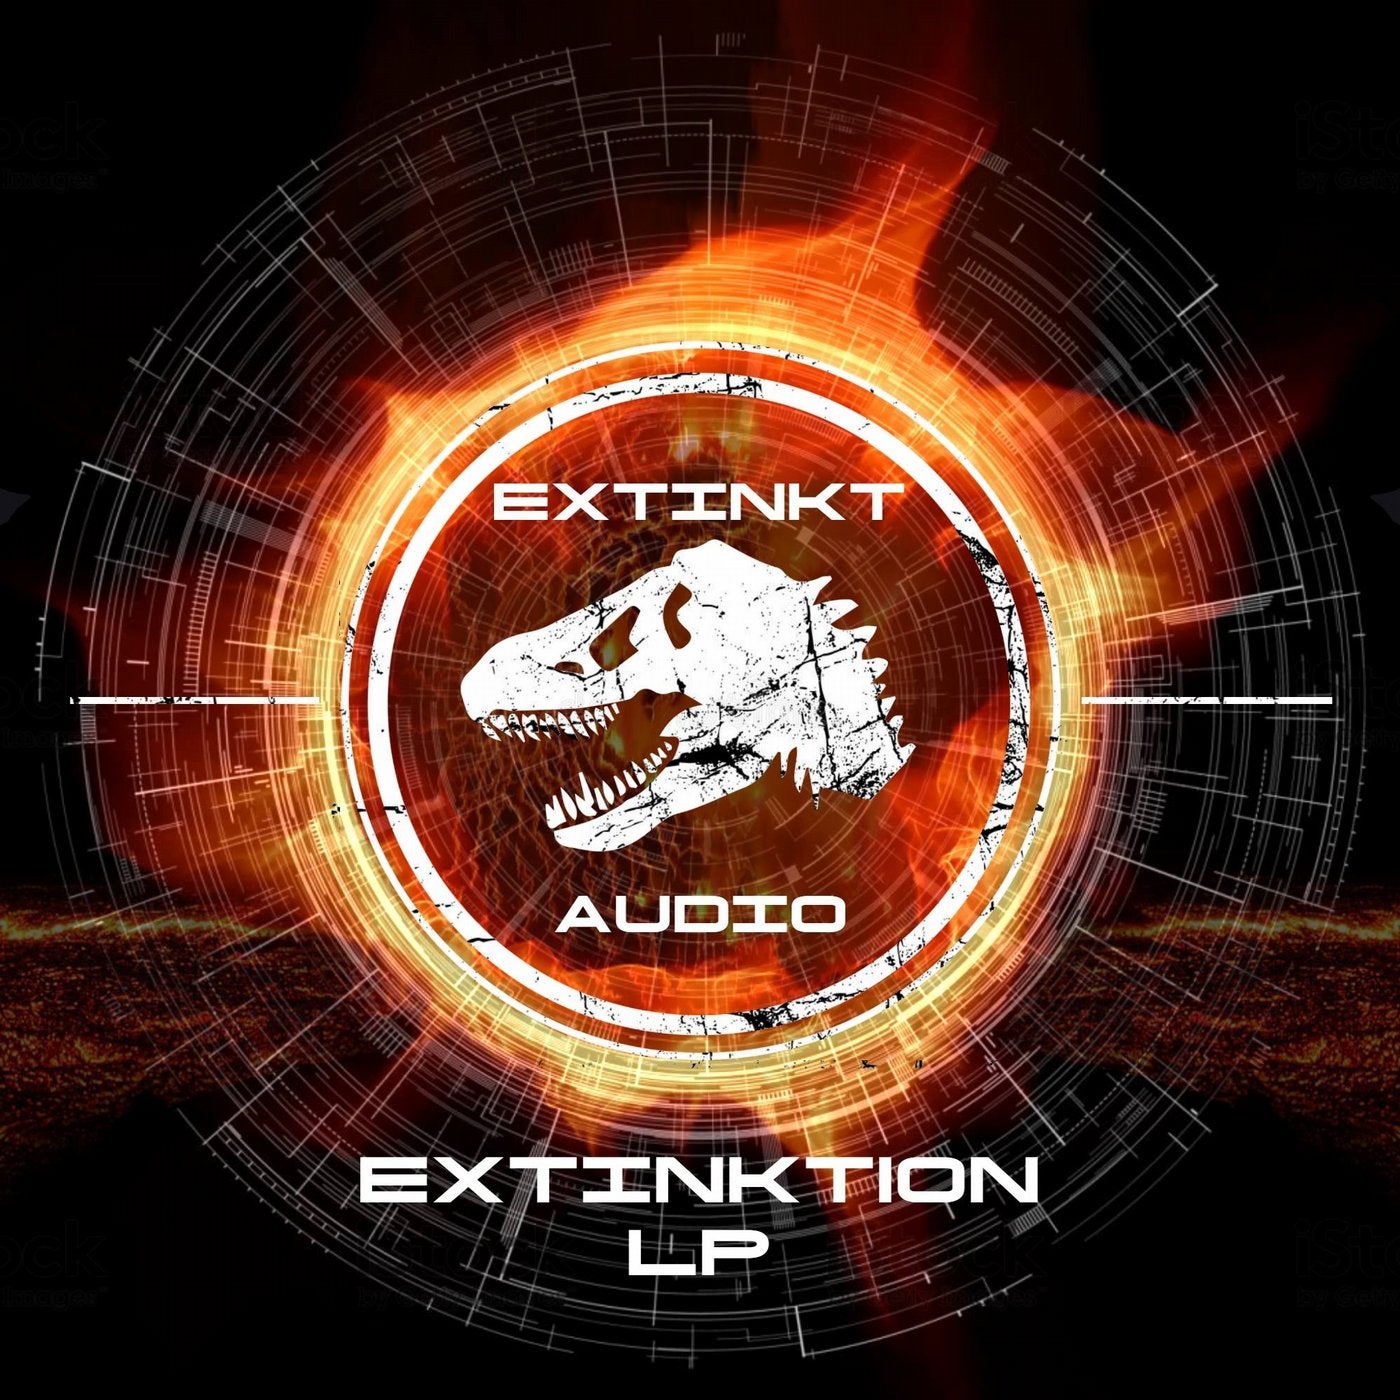 The Extinktion LP